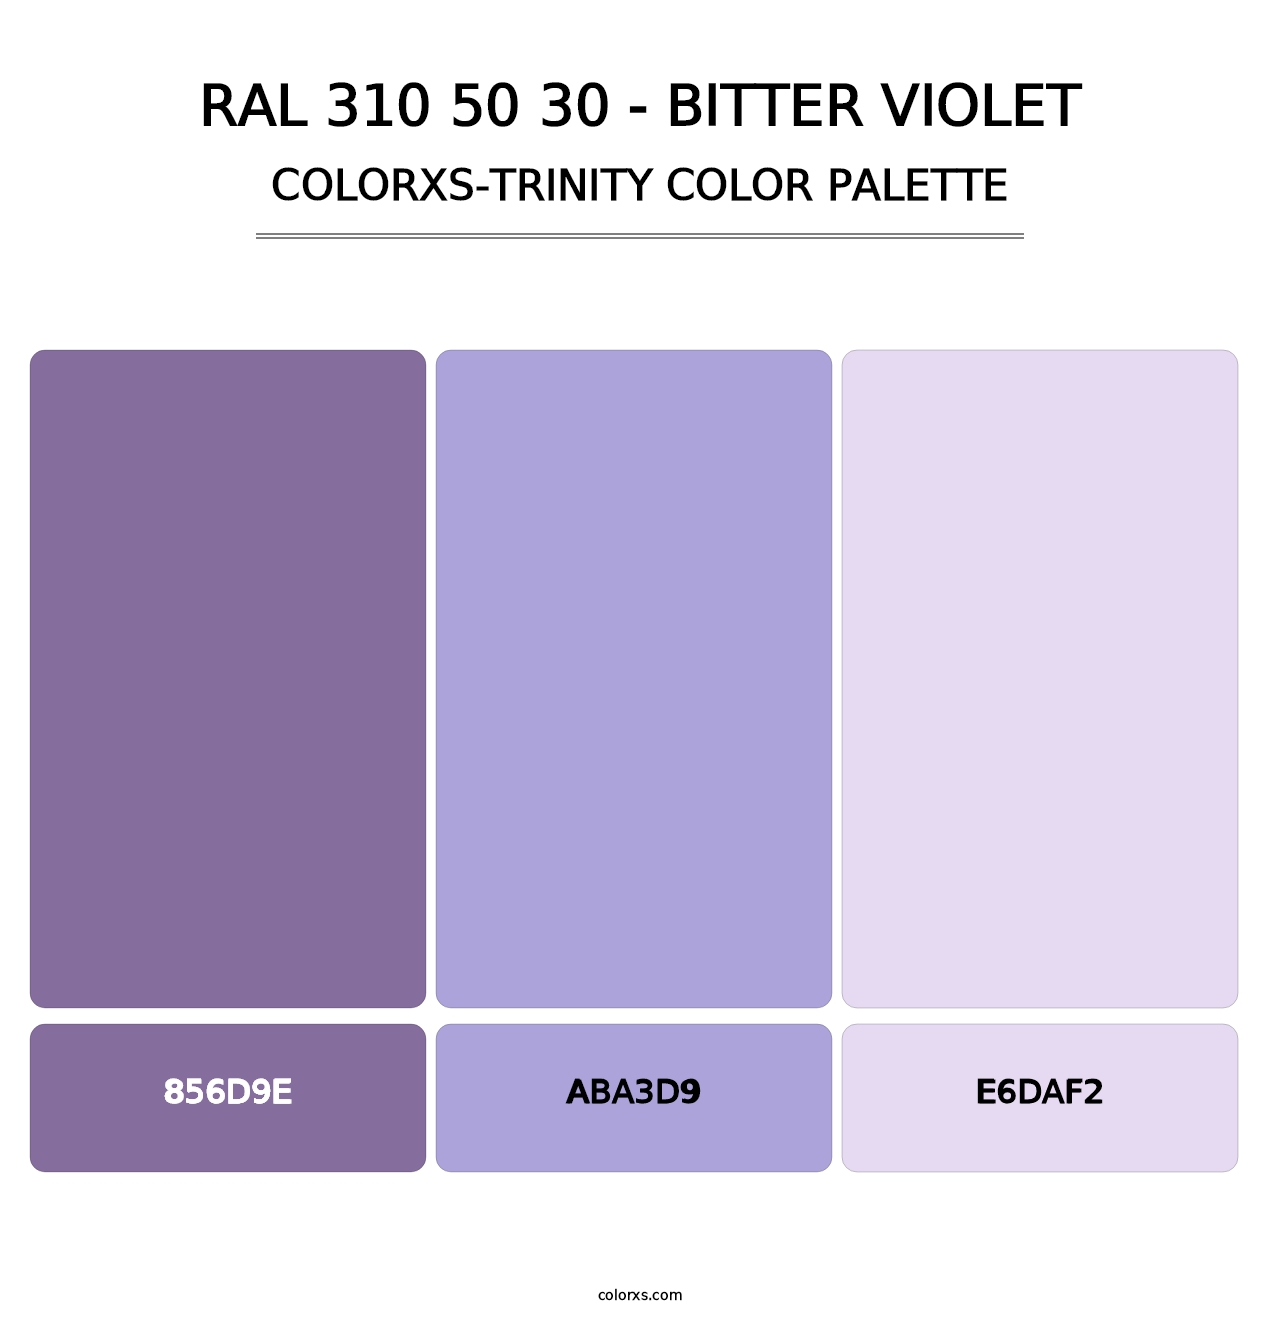 RAL 310 50 30 - Bitter Violet - Colorxs Trinity Palette